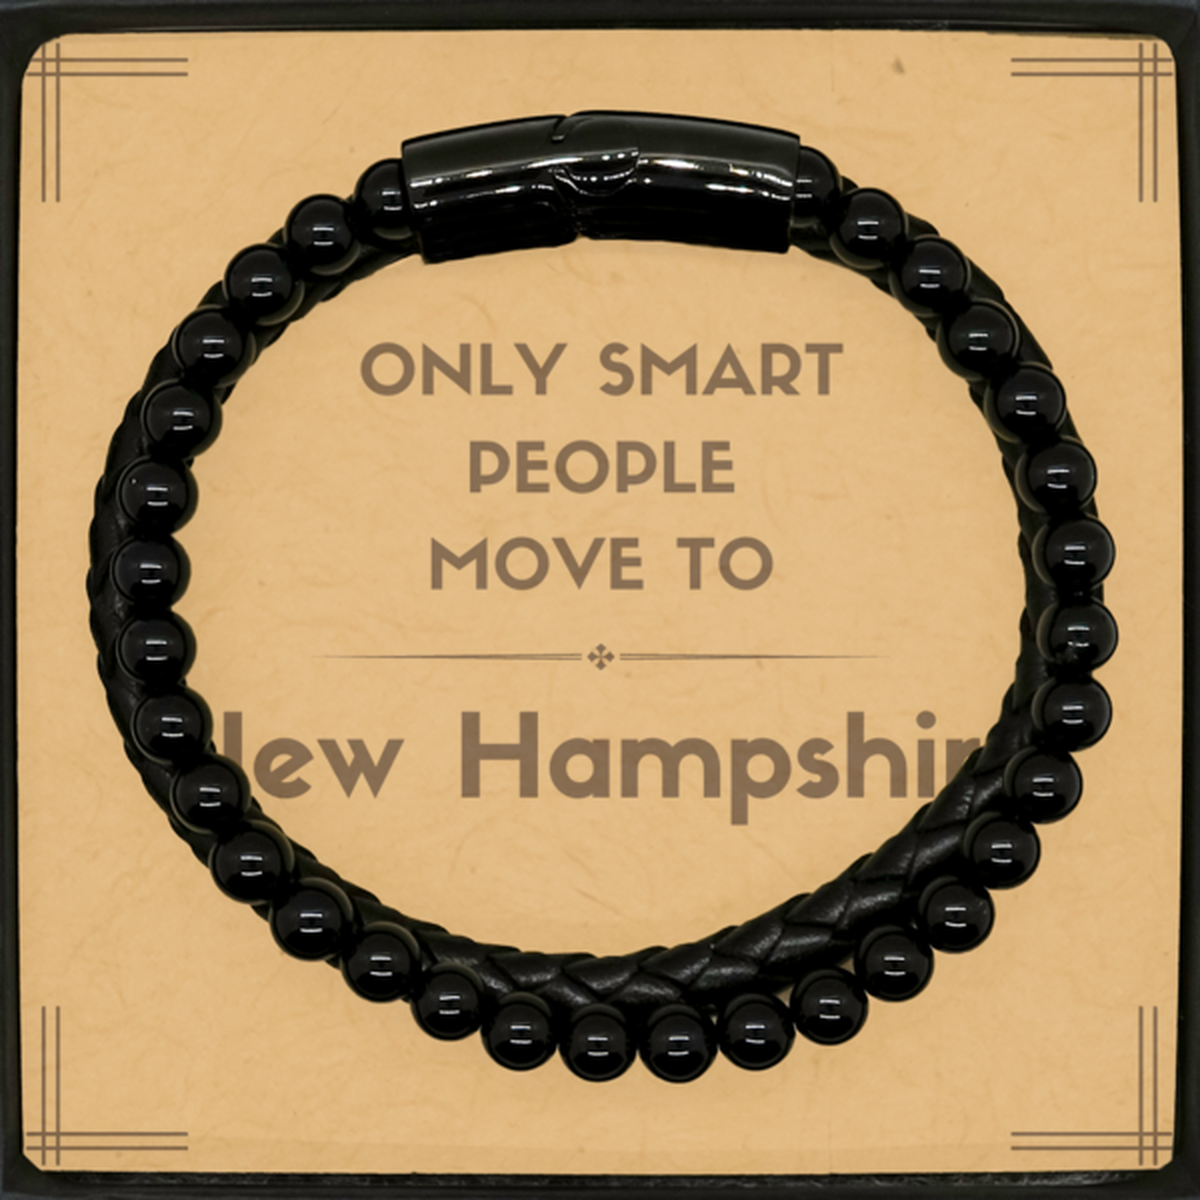 Only smart people move to New Hampshire Stone Leather Bracelets, Message Card Gifts For New Hampshire, Move to New Hampshire Gifts for Friends Coworker Funny Saying Quote